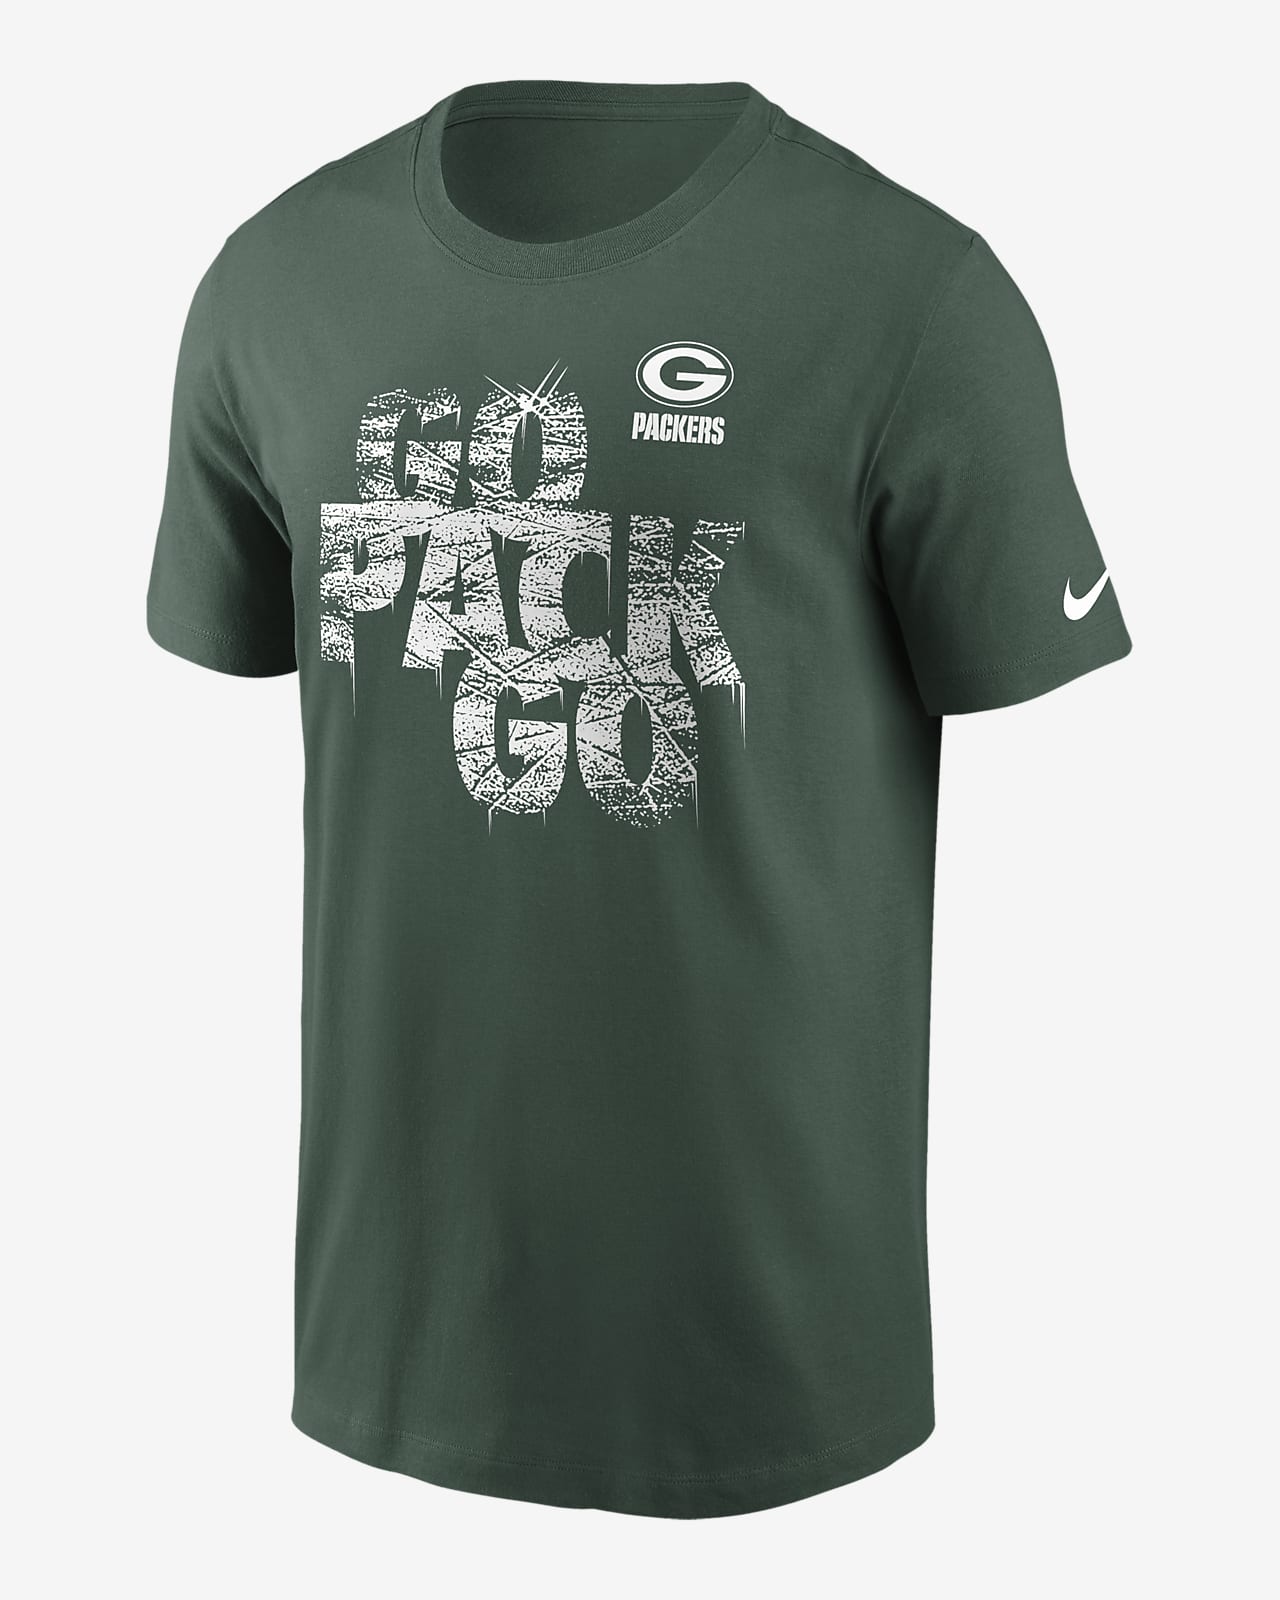 Playera Nike NFL para hombre Green Bay Packers Local Essential